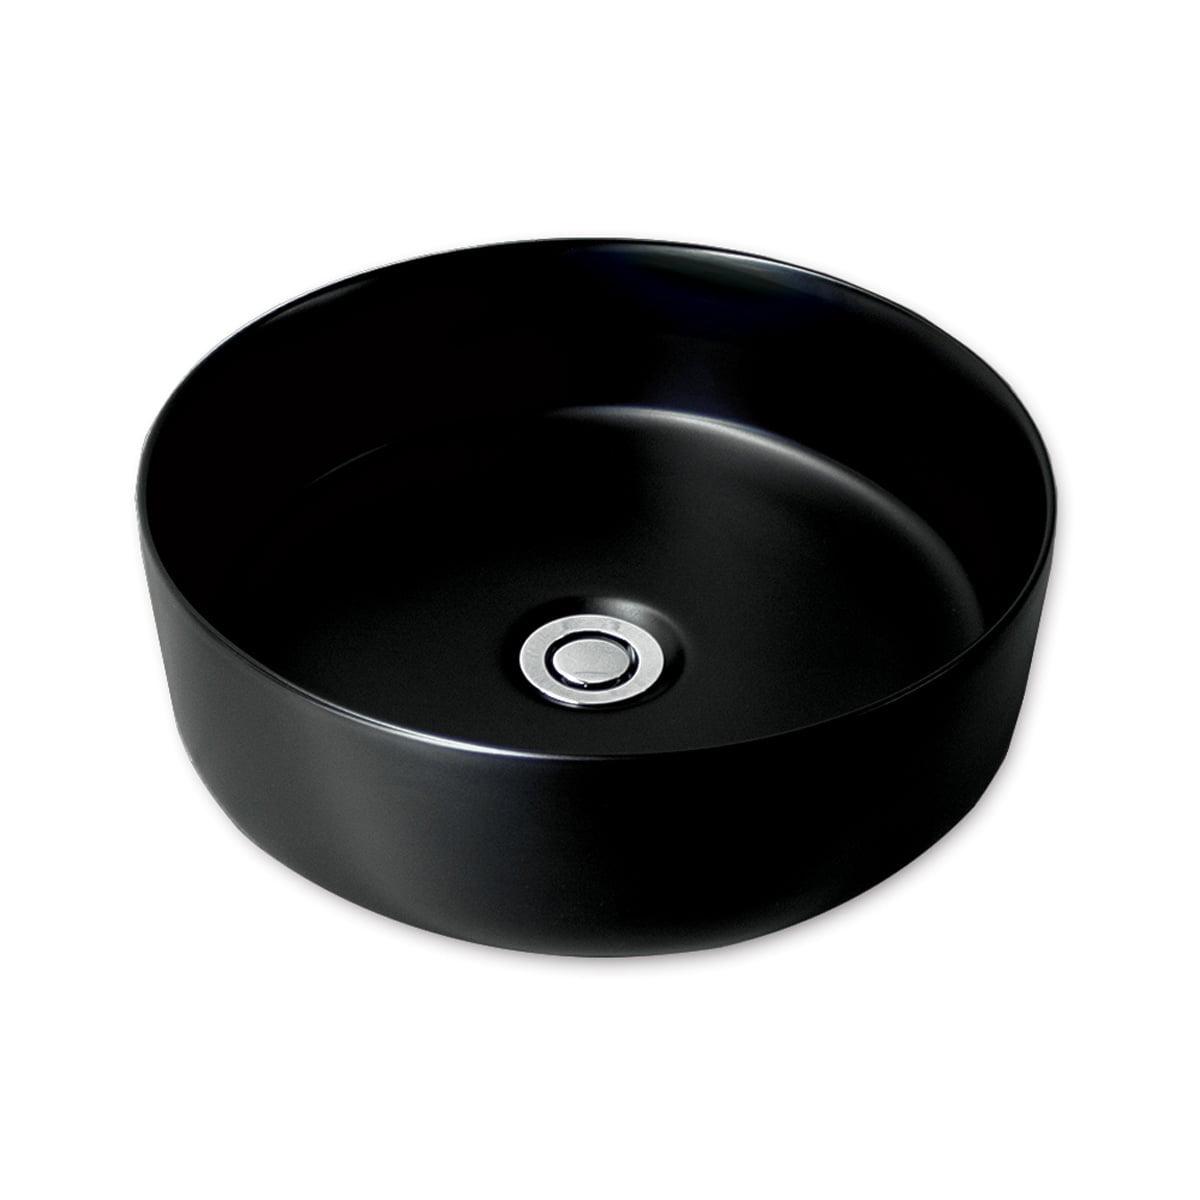 Icarus bench mount ceramic basin product specification